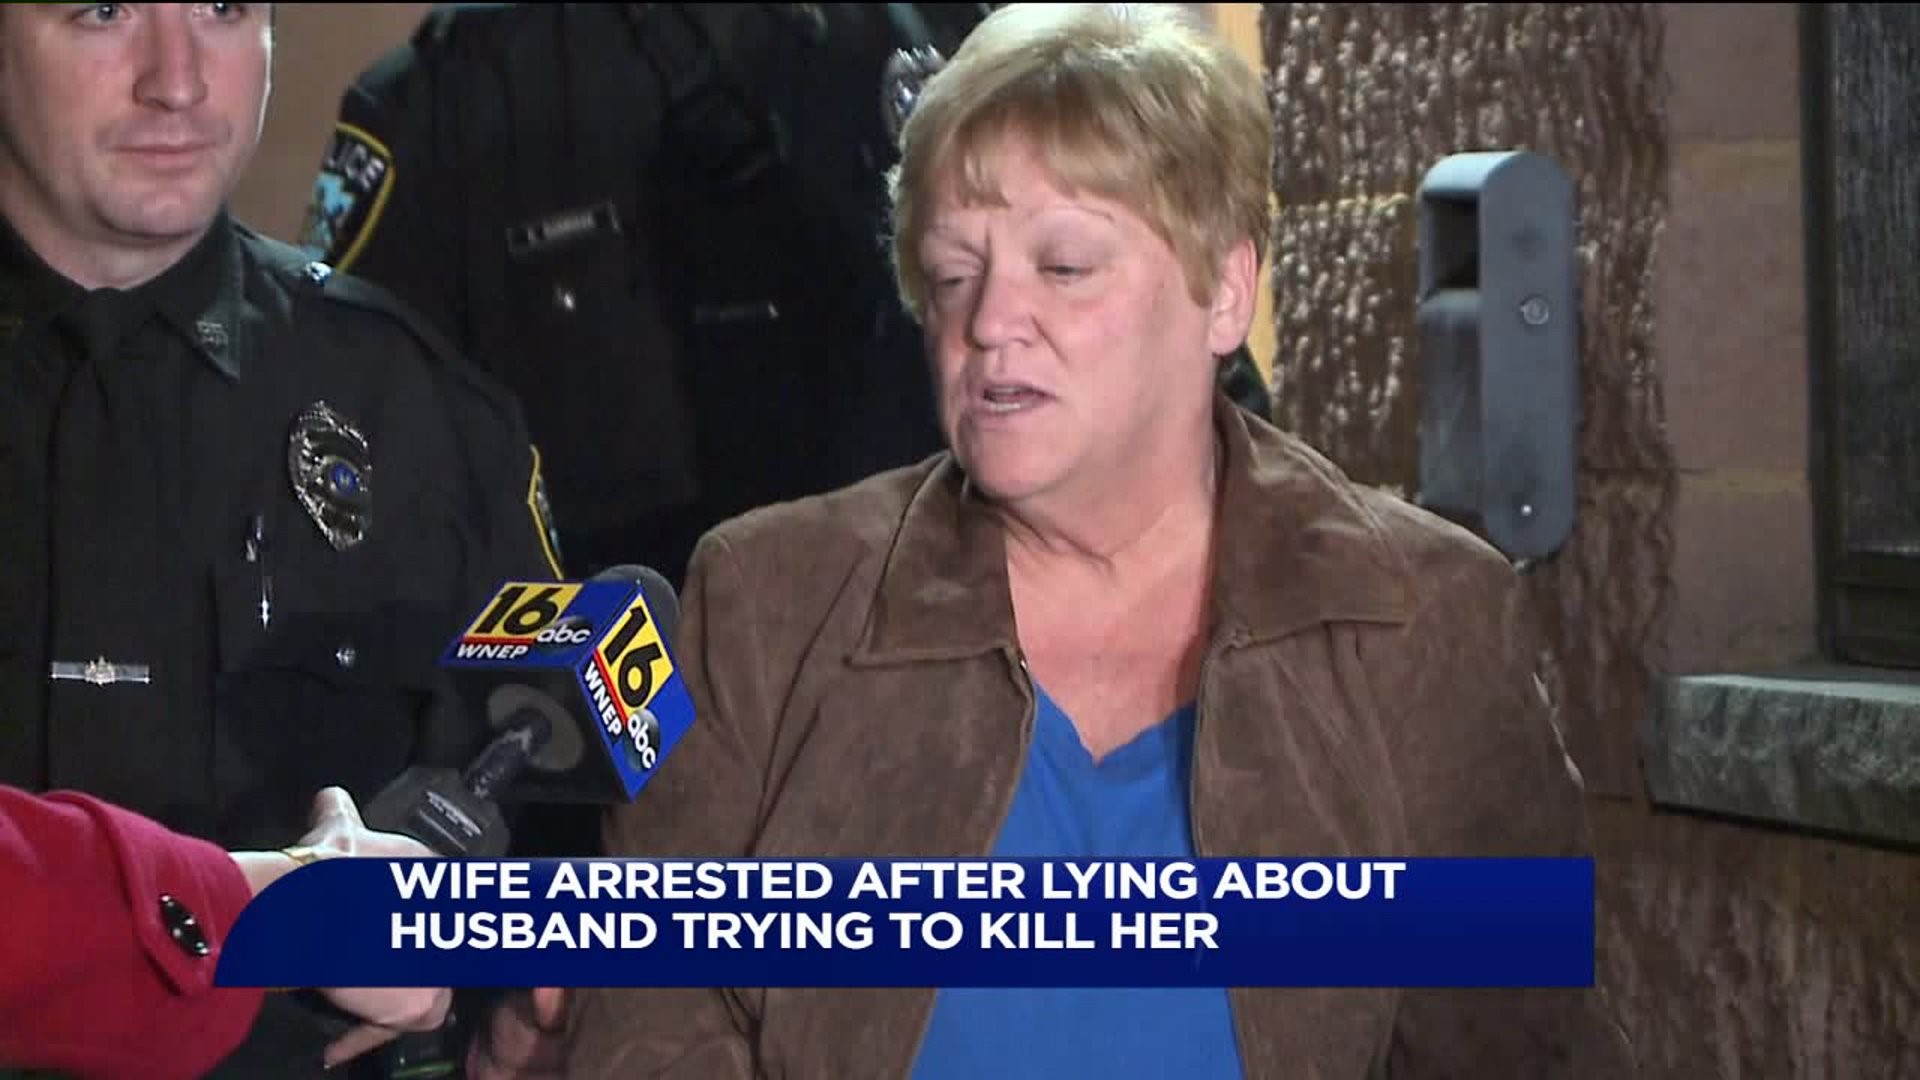 Police: Woman Lied, Estranged Husband Did Not Try to Shoot Her